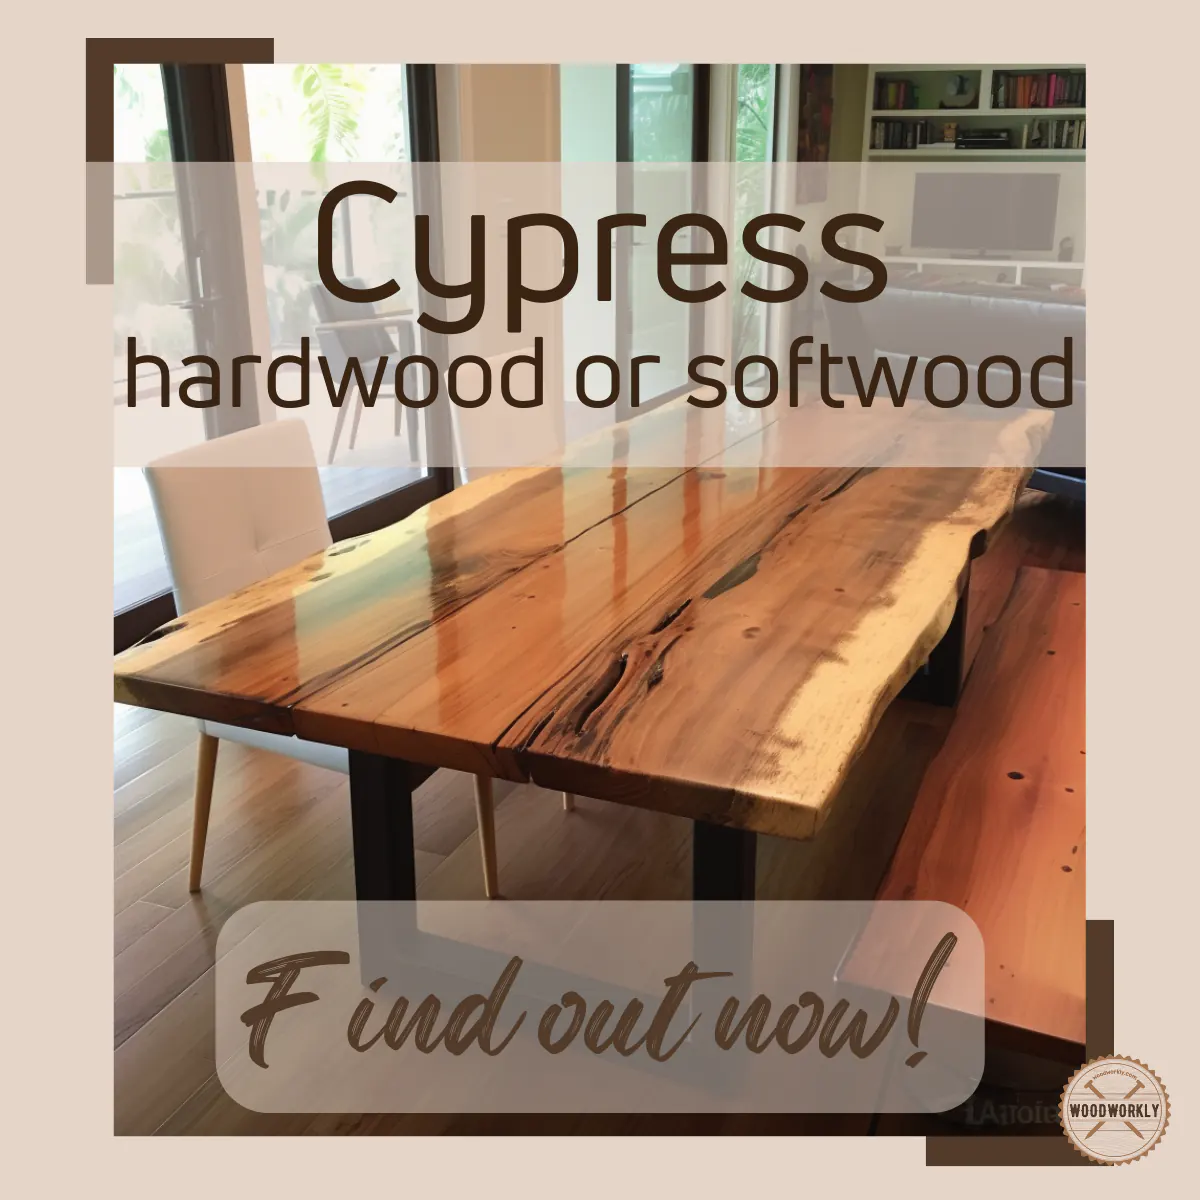 Is cypress a hardwood or softwood